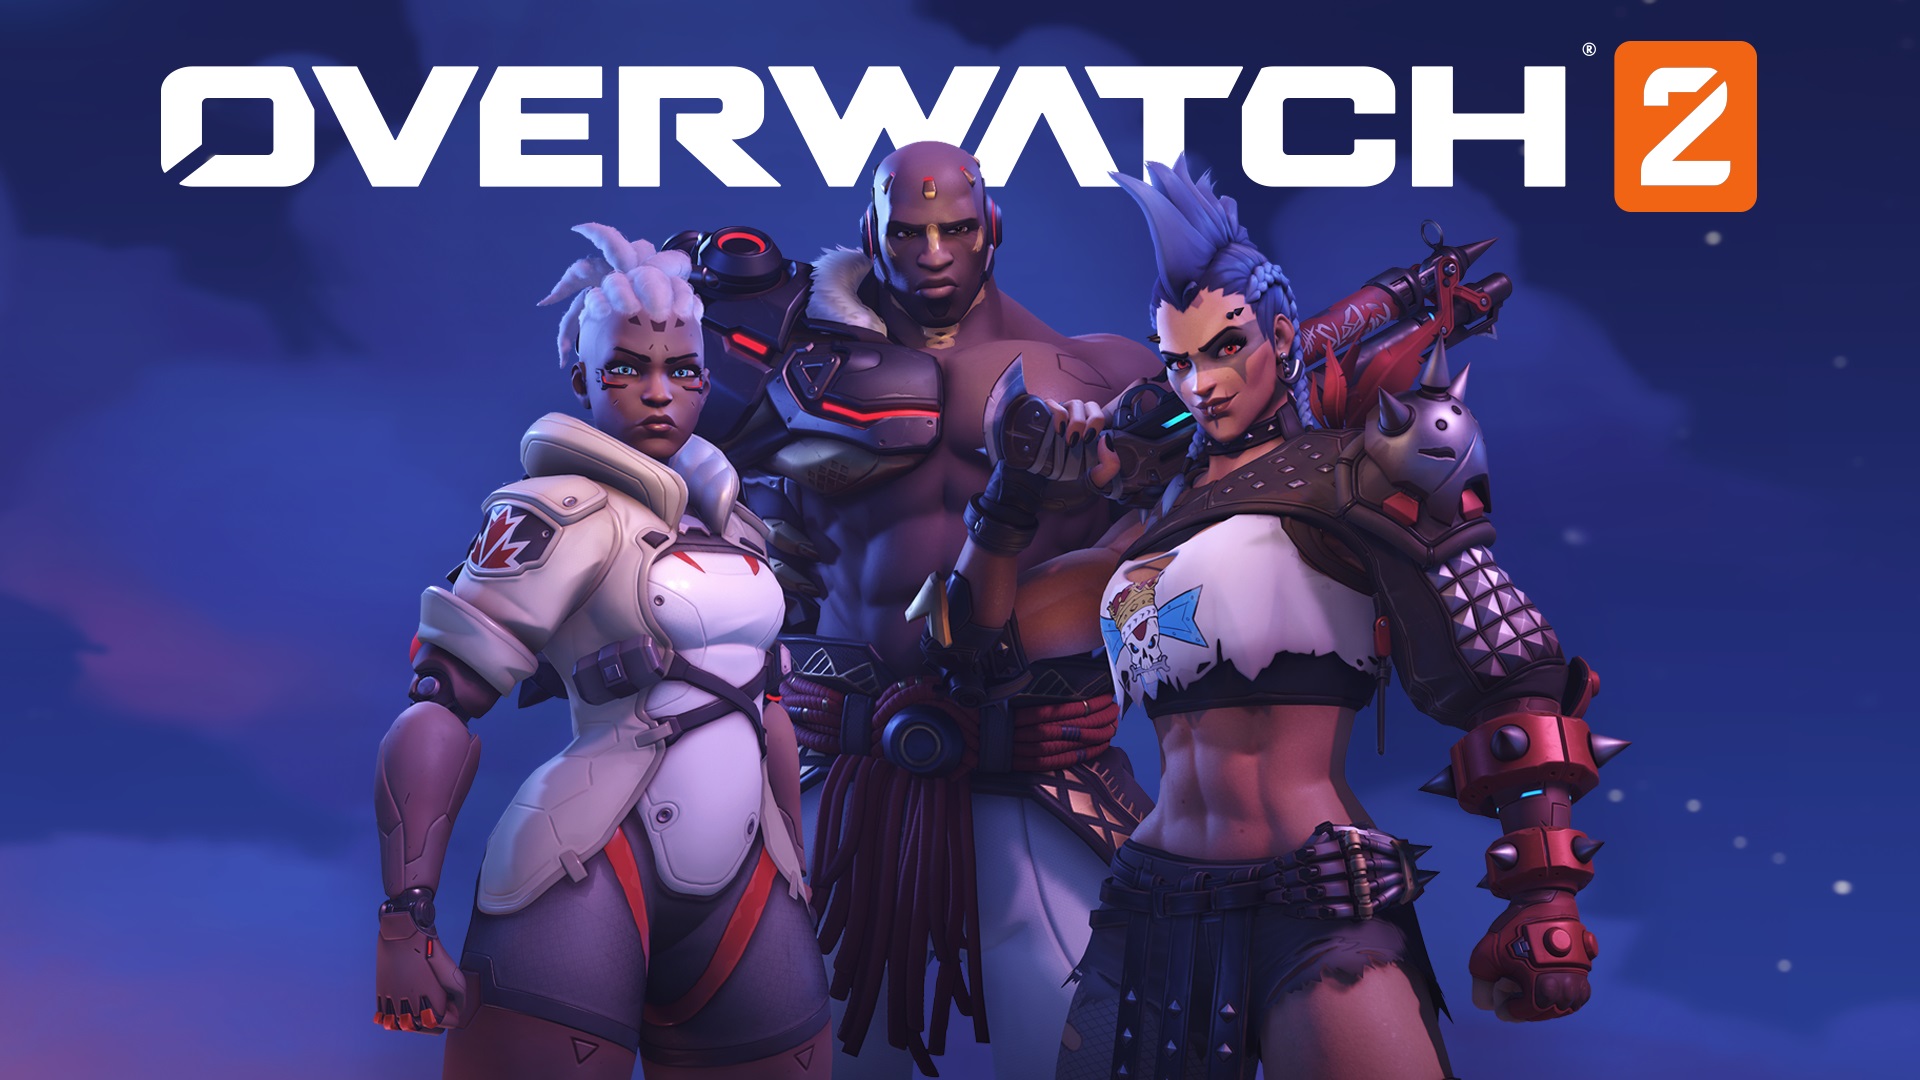 Overwatch 2 free-to-play launches in October 2022